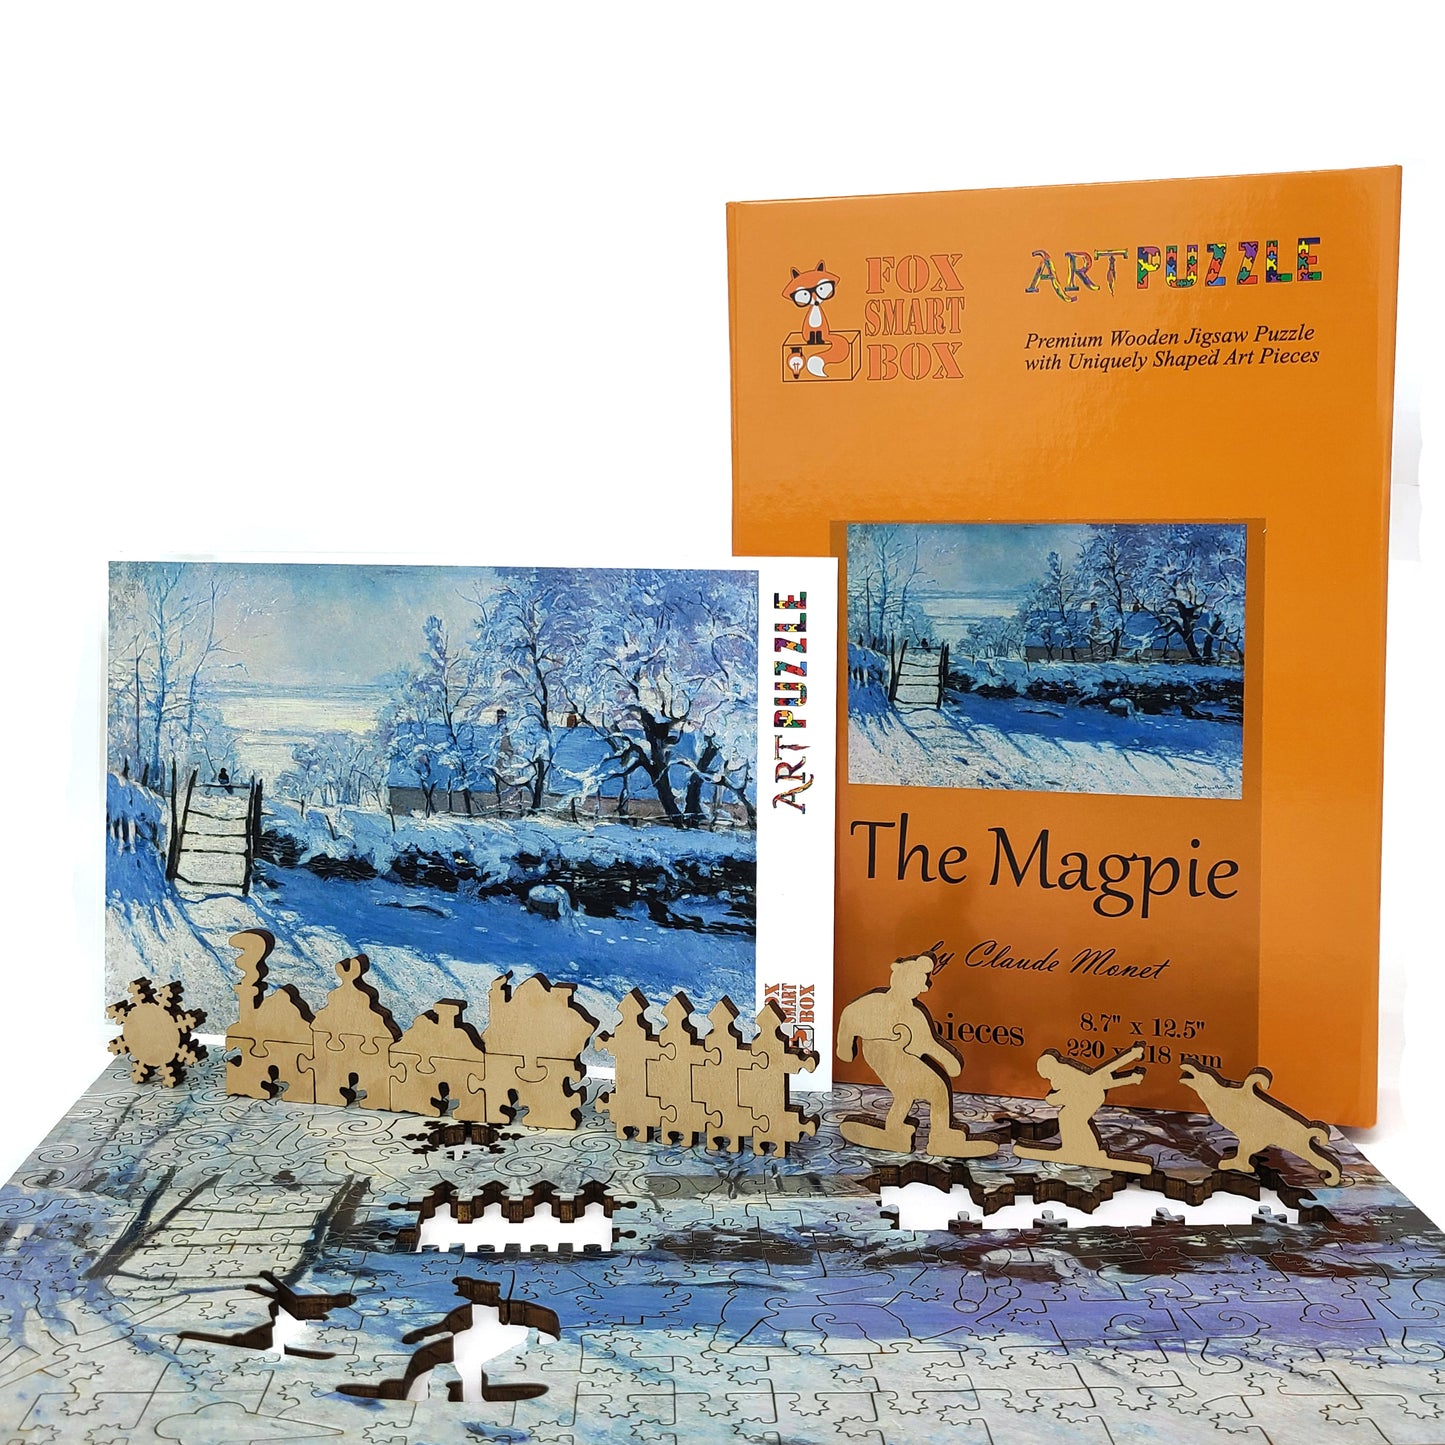 Wooden Jigsaw Puzzle with Uniquely Shaped Pieces for Adults - 210 Pieces - The Magpie